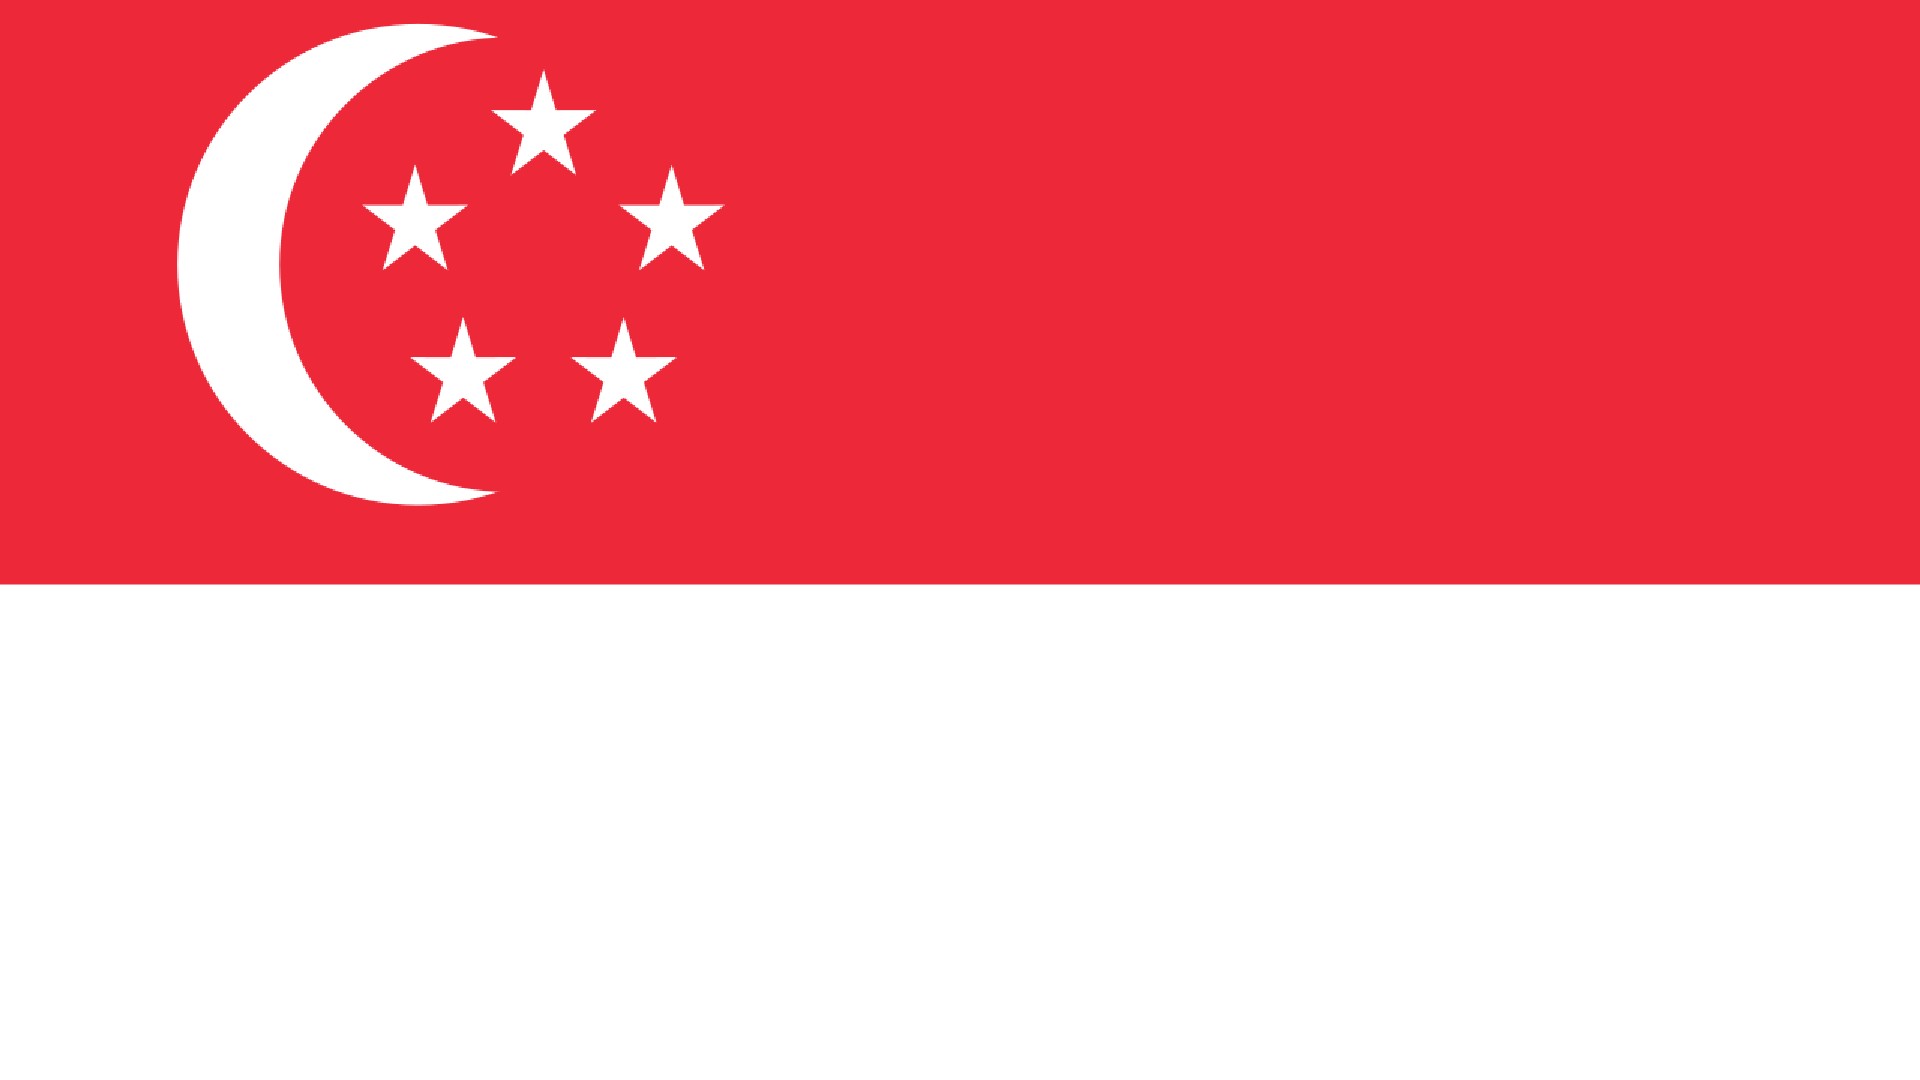 An image of the flag of Singapore